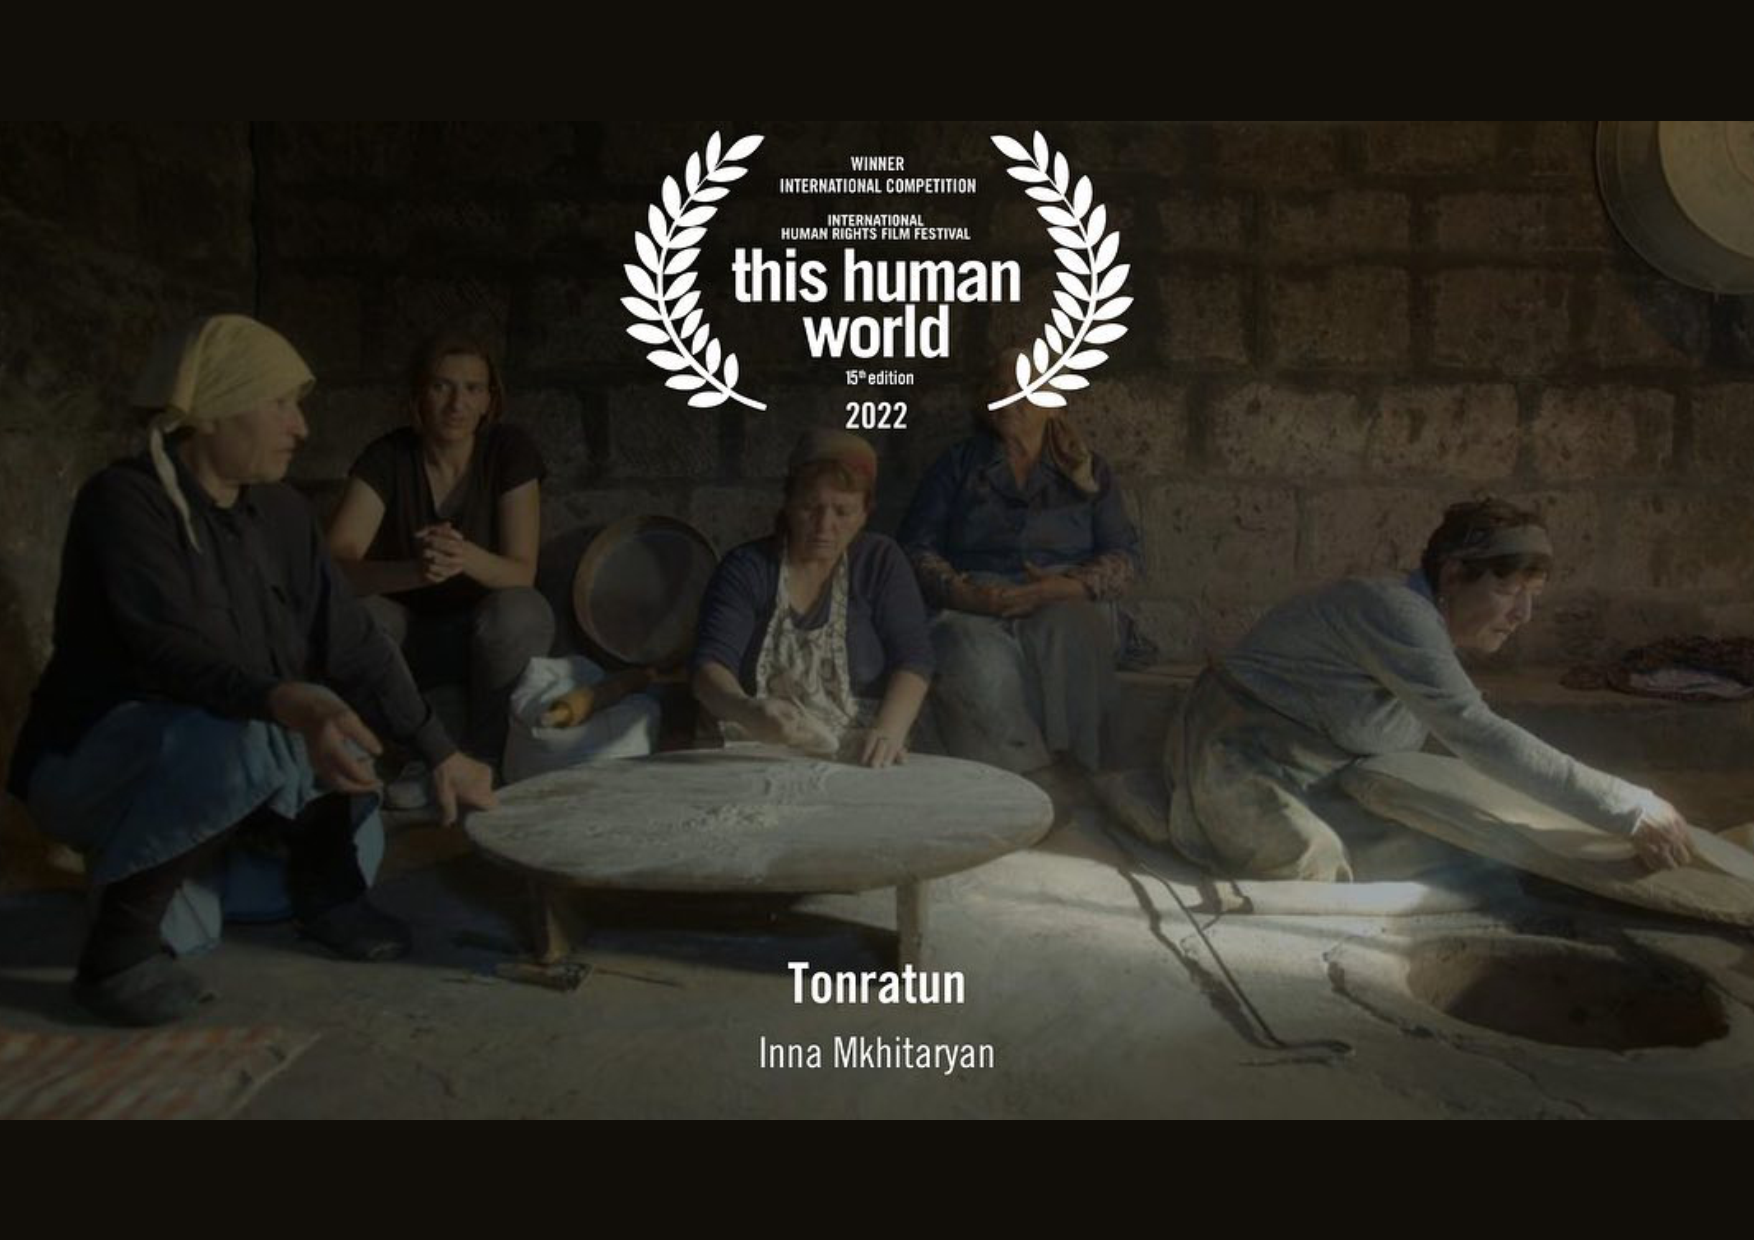 Tonratun, the winner of the International Competition of the “This Human World” Film Festival in Vienna